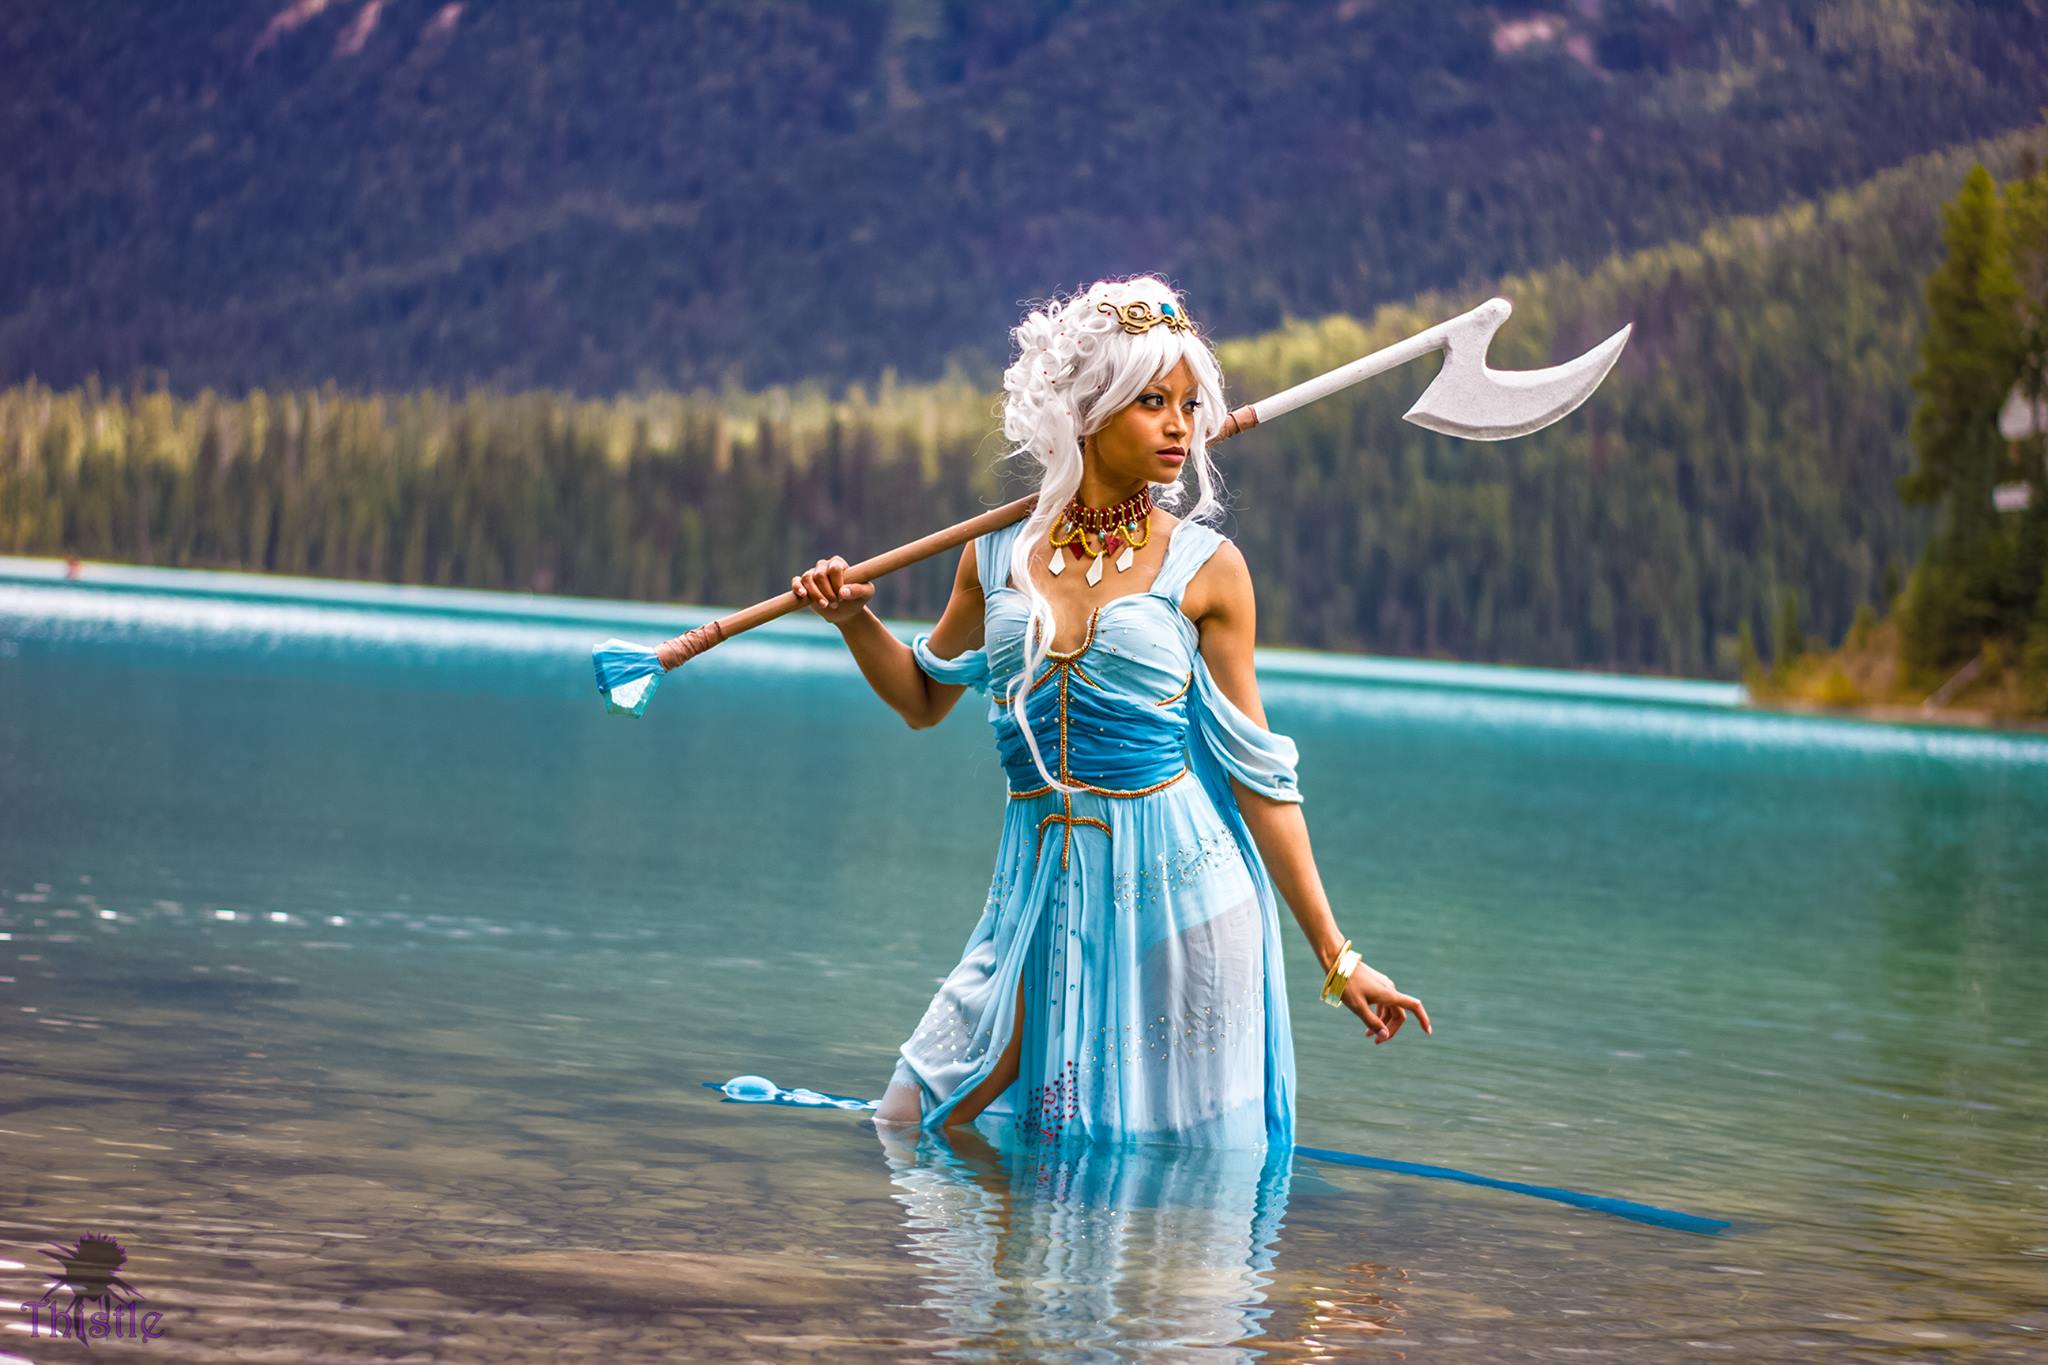 Cosplay Goes Wild In The Great Frozen North